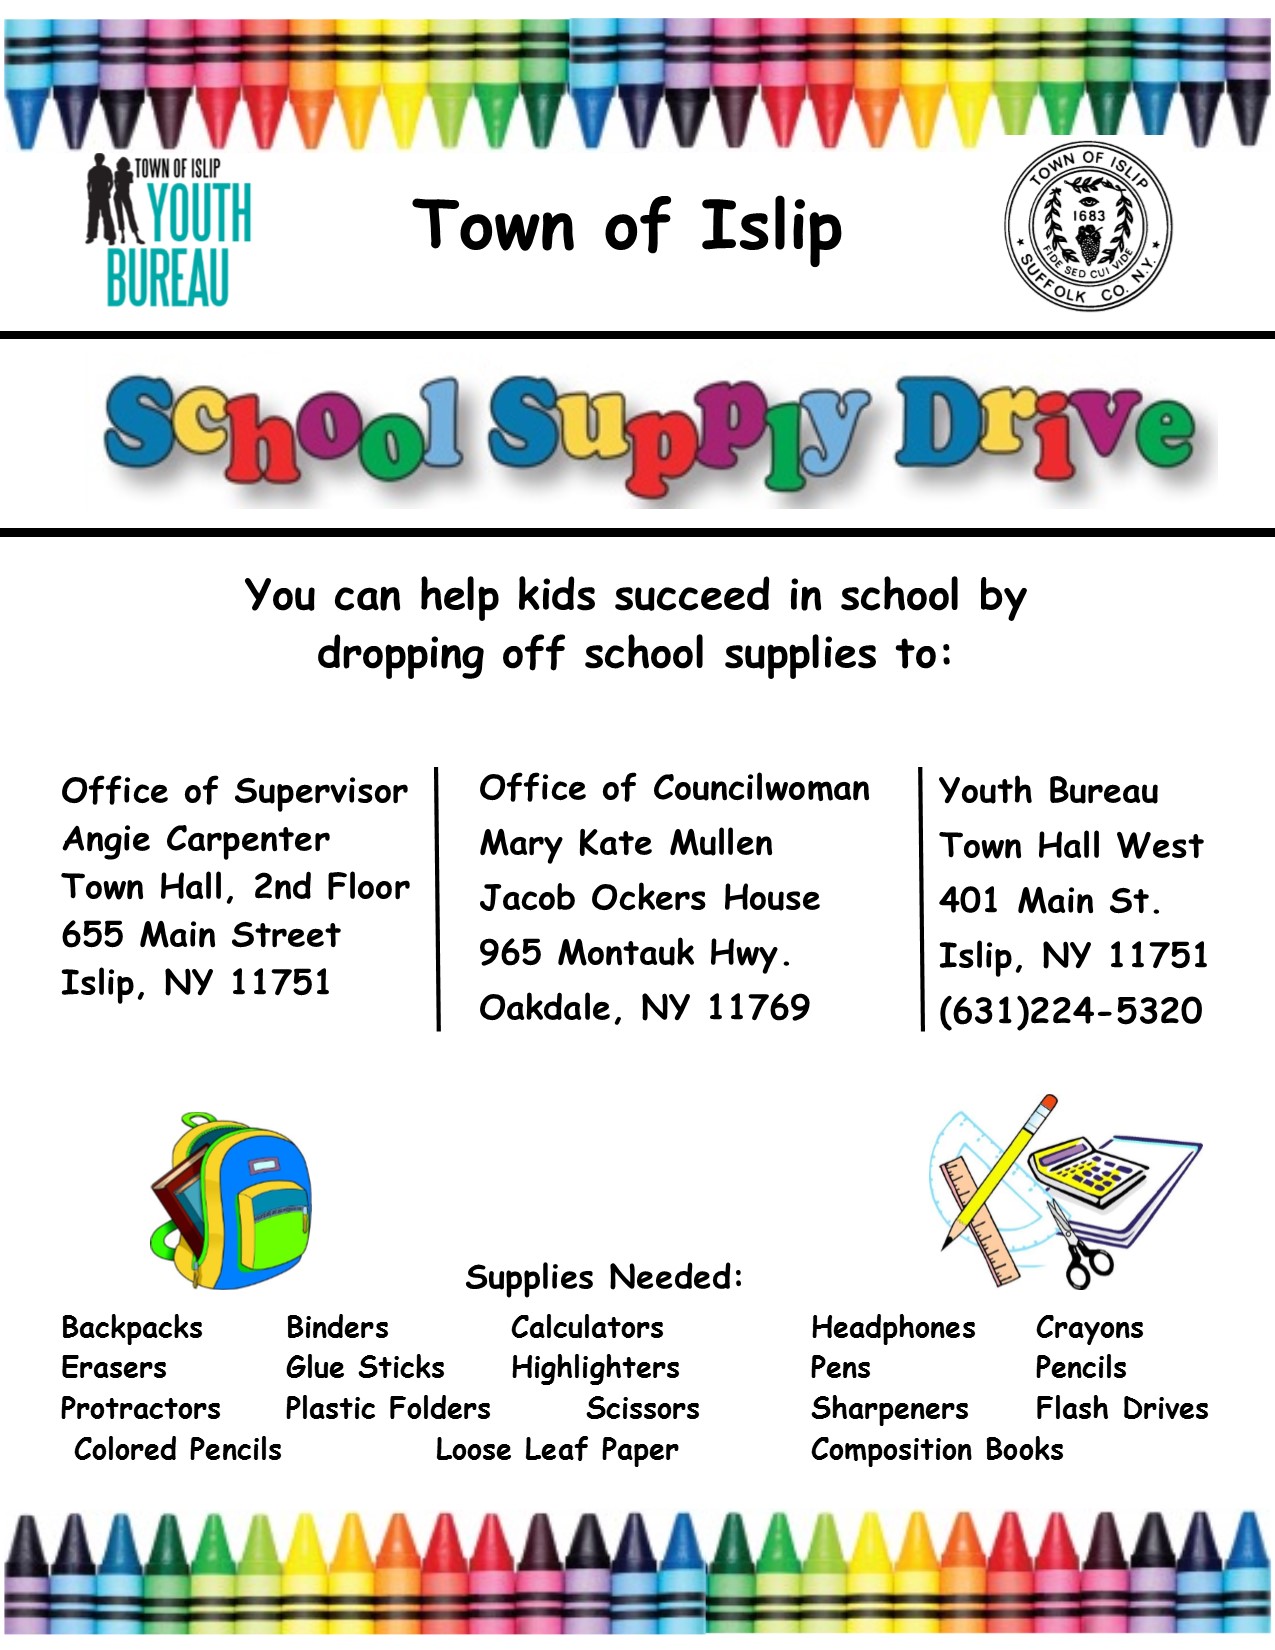 a flyer image announcing the supply drive with drop off locations located at the Office of the Supervisor, the Youth Bureau and Councilwoman Mullen's Office. Call (631)224-5320 for more information